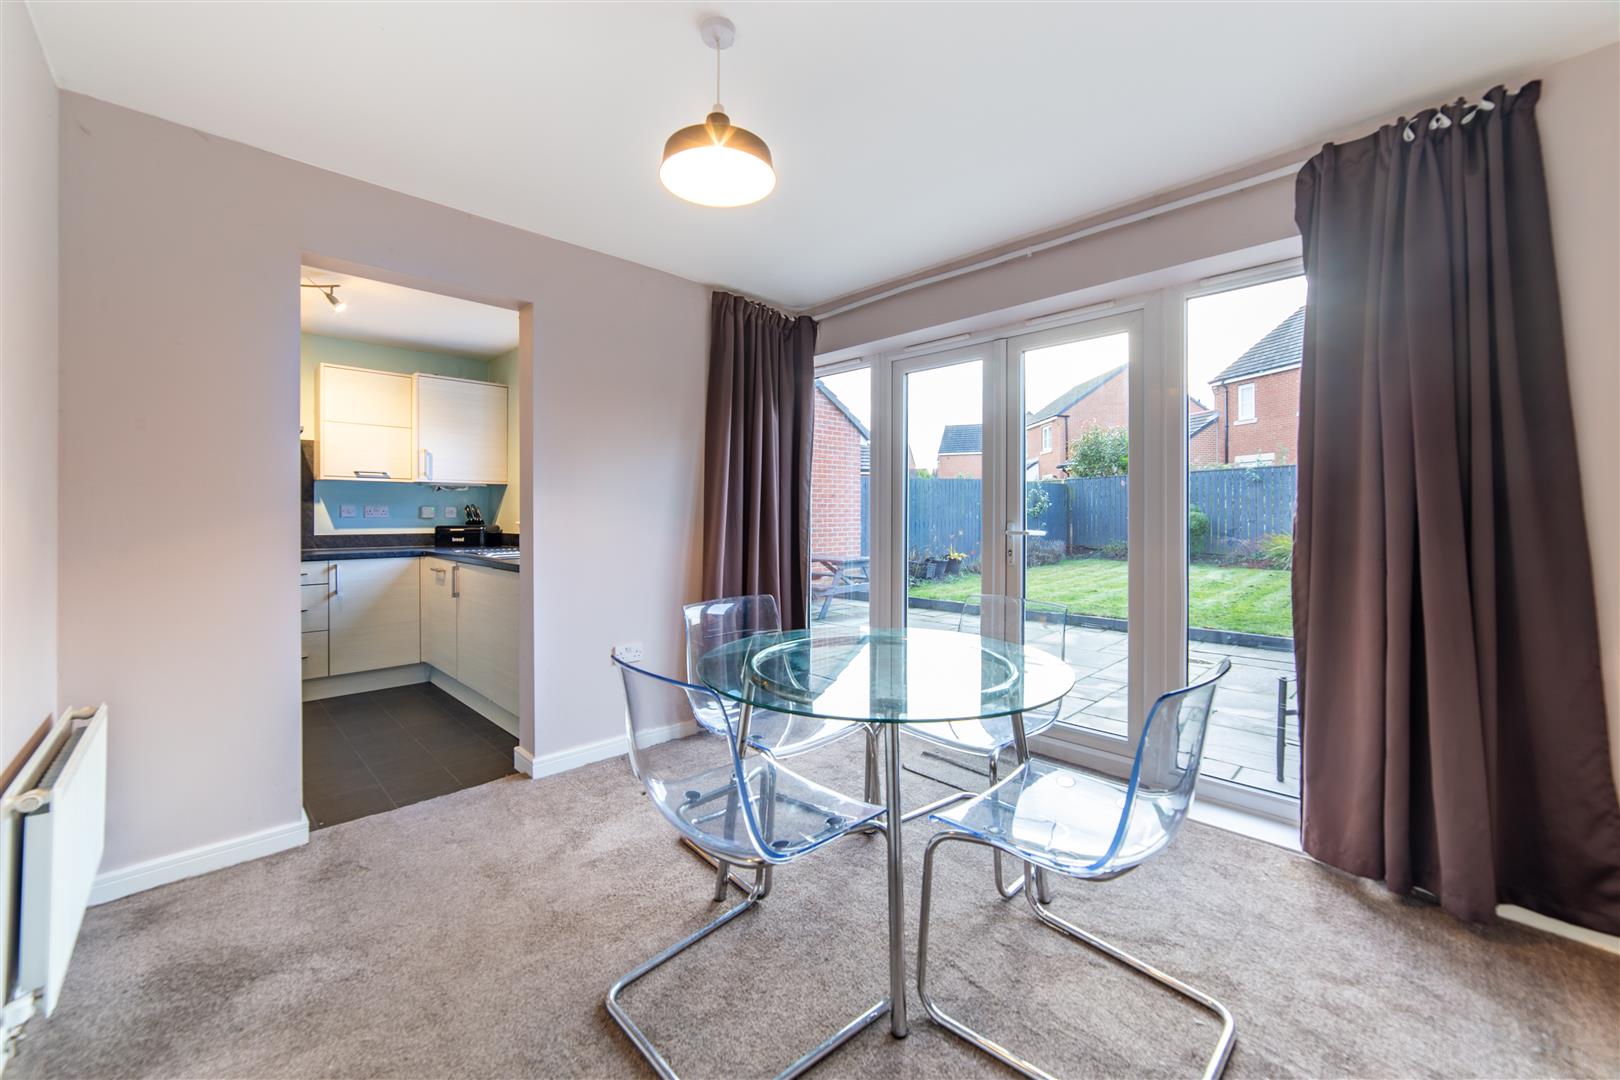 4 bed semi-detached house for sale in Akenshaw Drive, Seaton Delaval  - Property Image 7